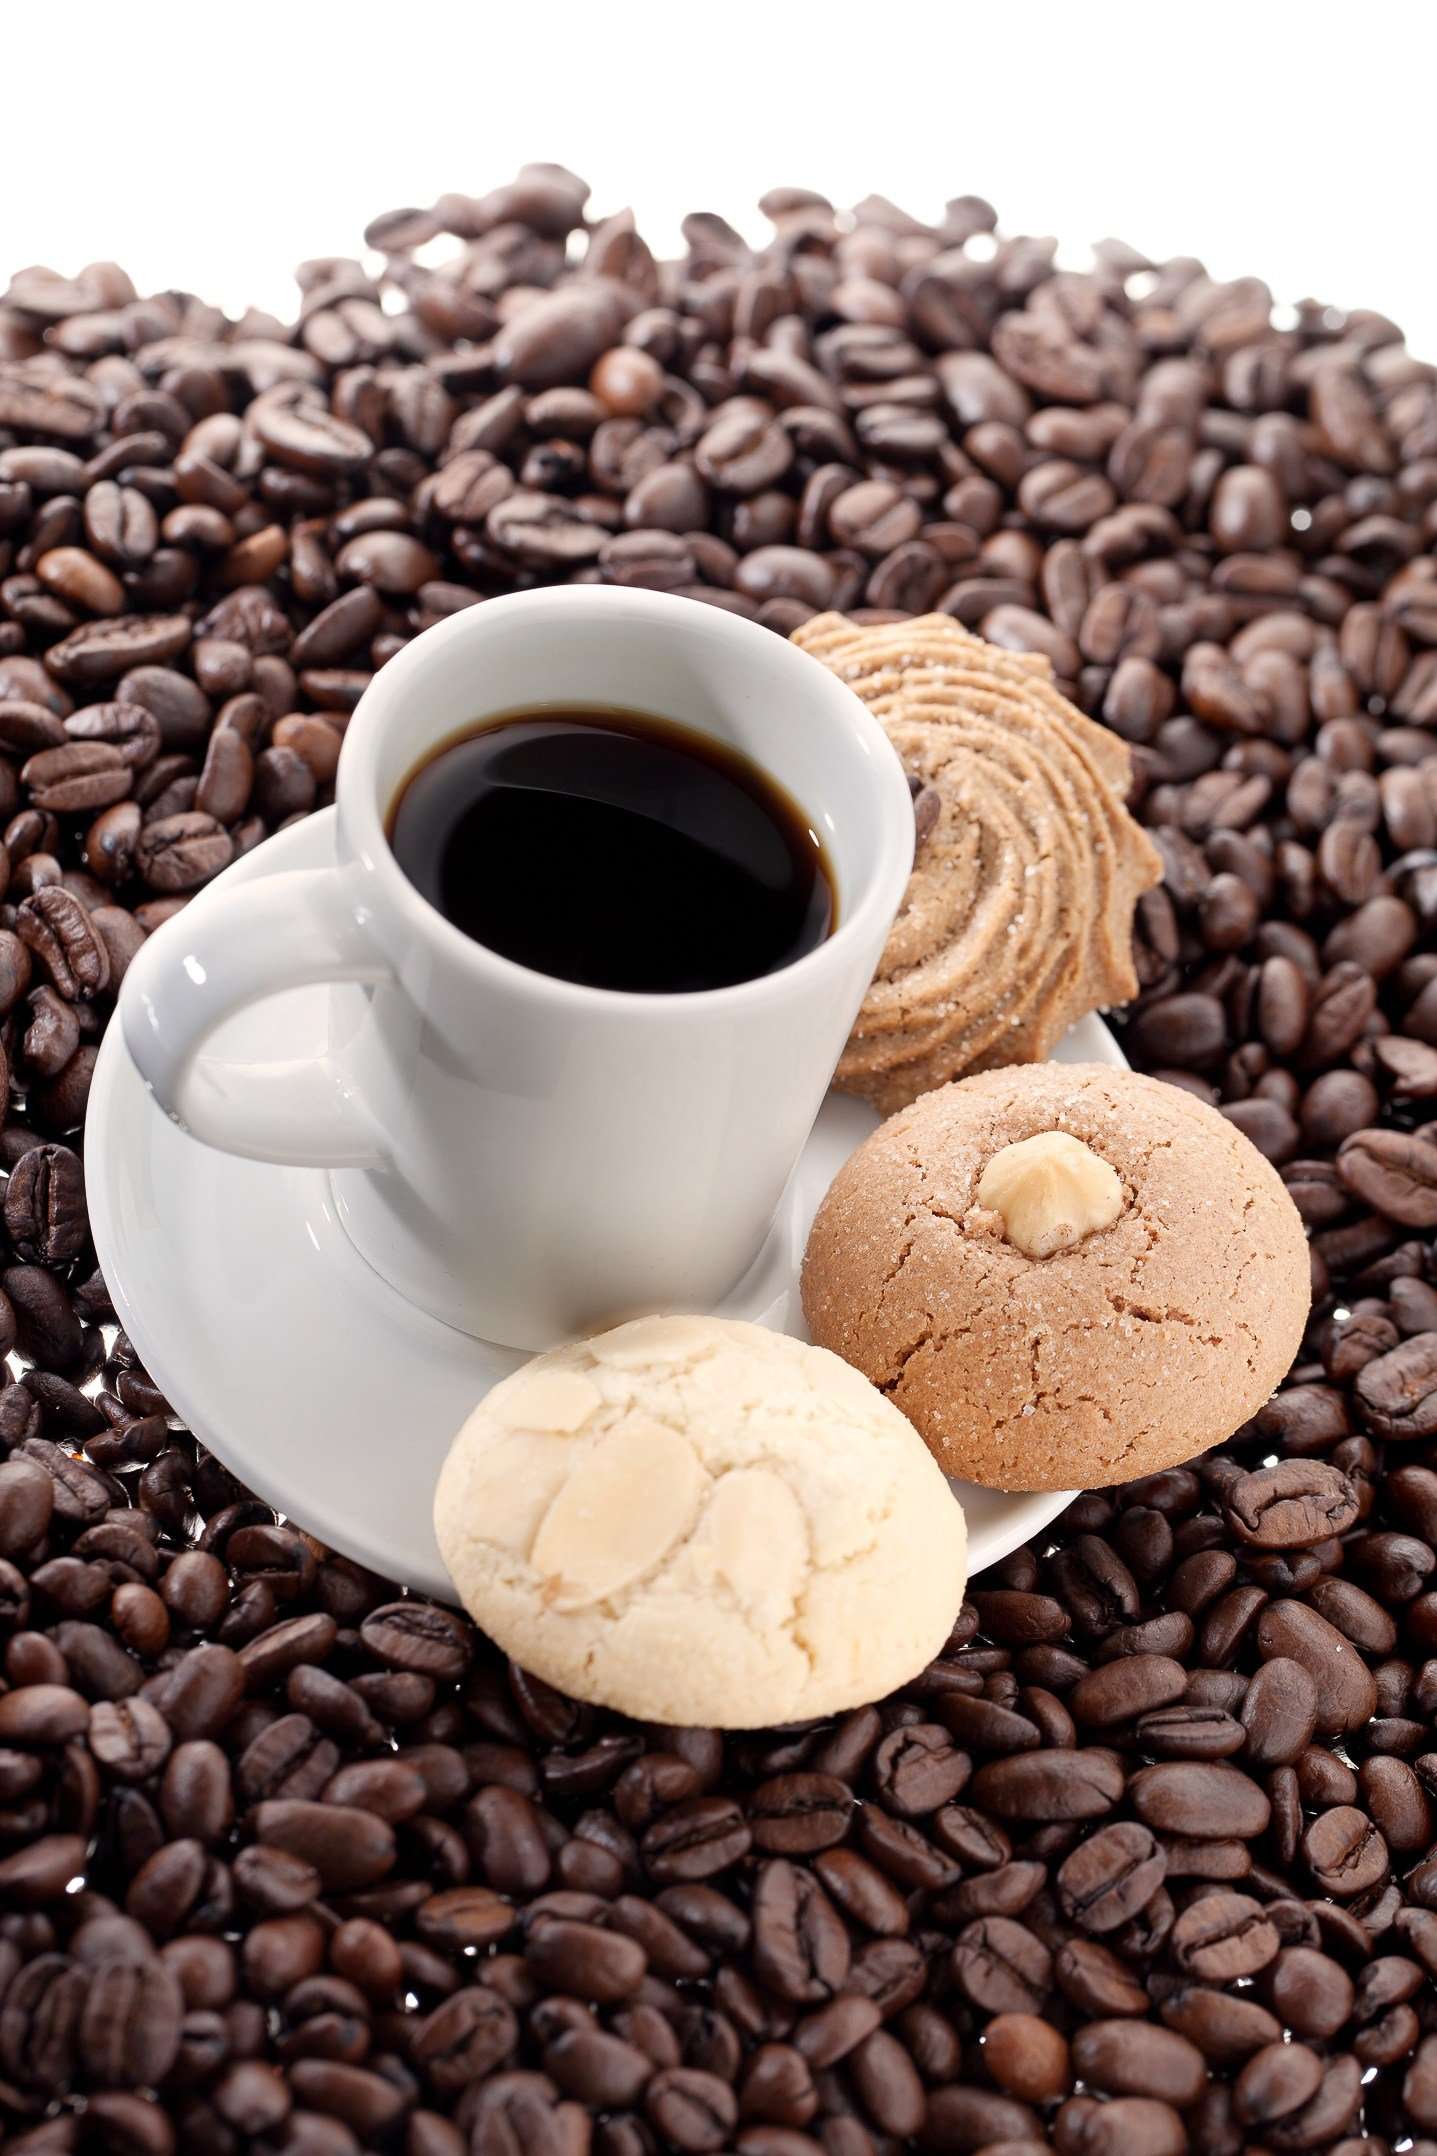 Fresh coffee and roasted coffee beans on white background ...